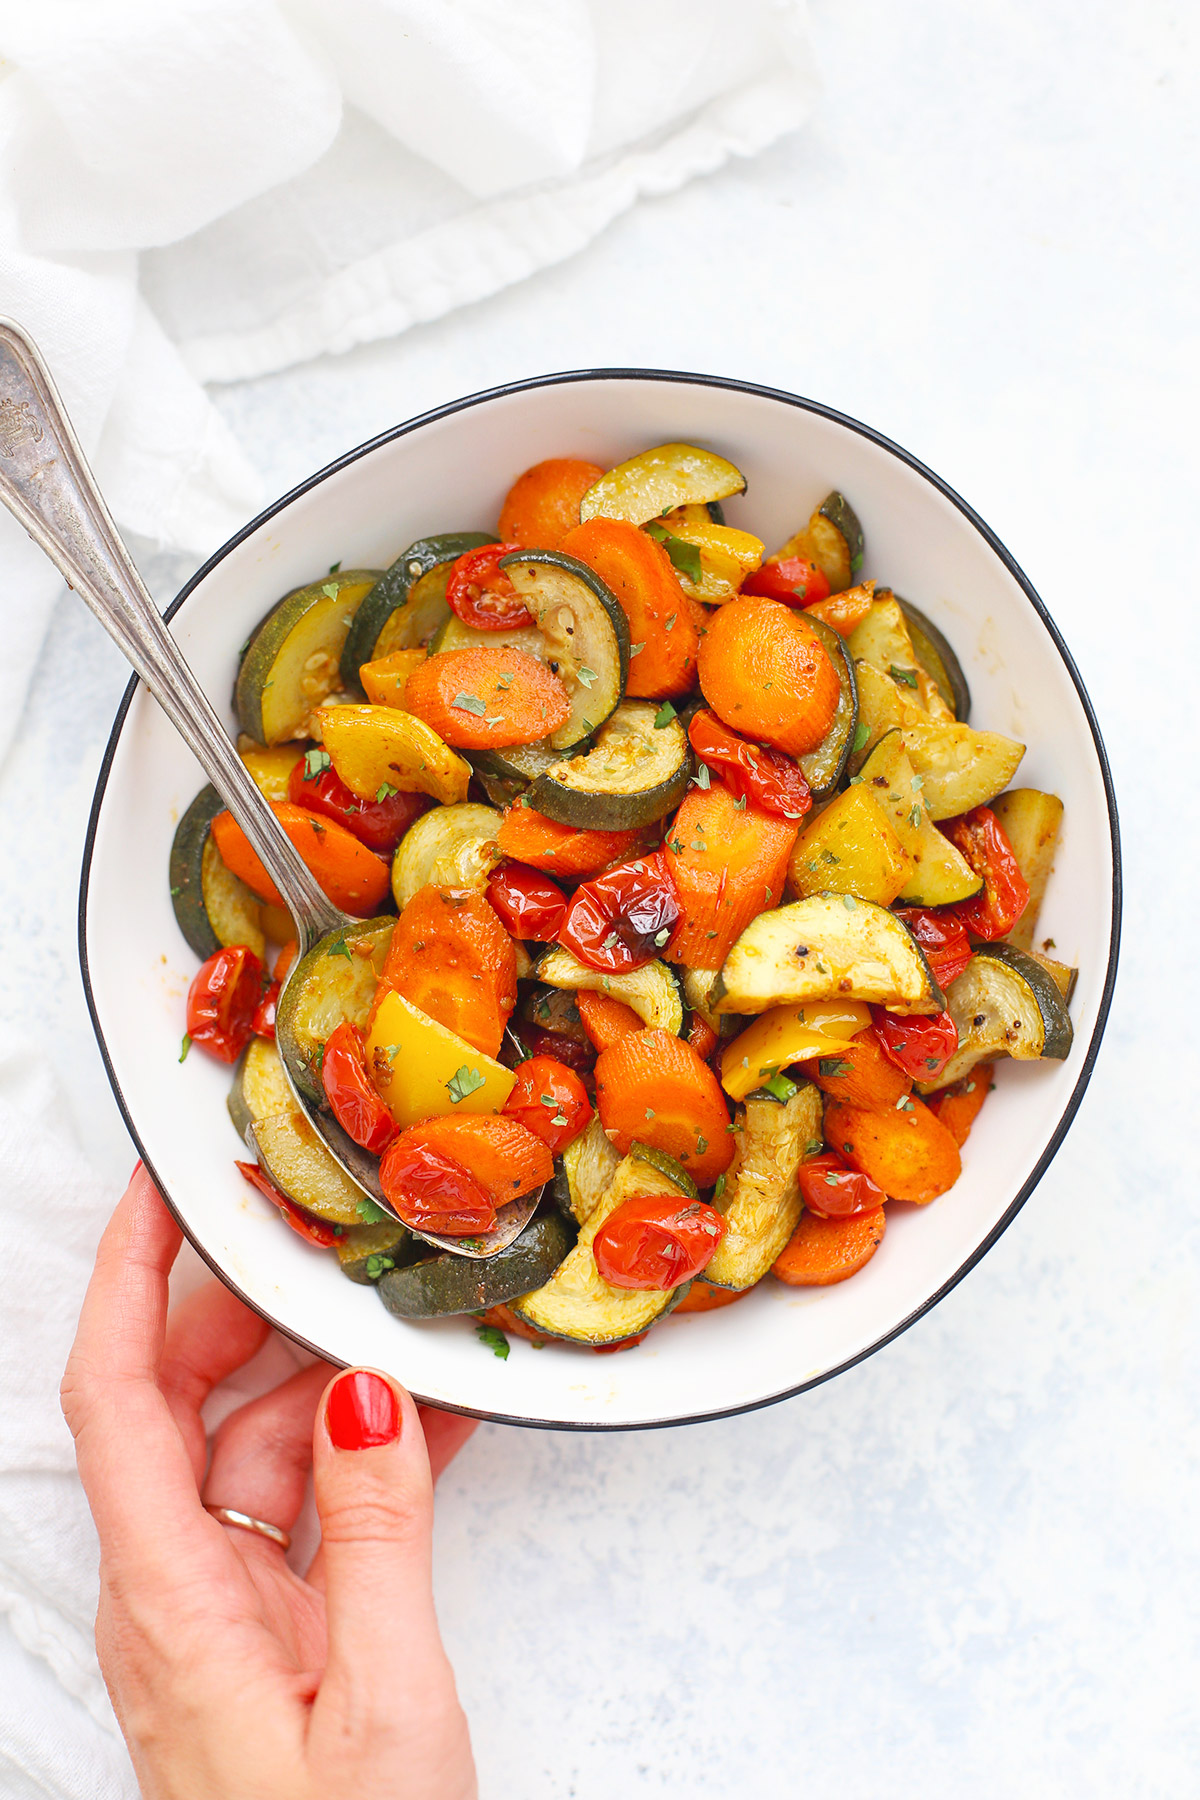 Old Bay Roasted Veggies from One Lovely Life